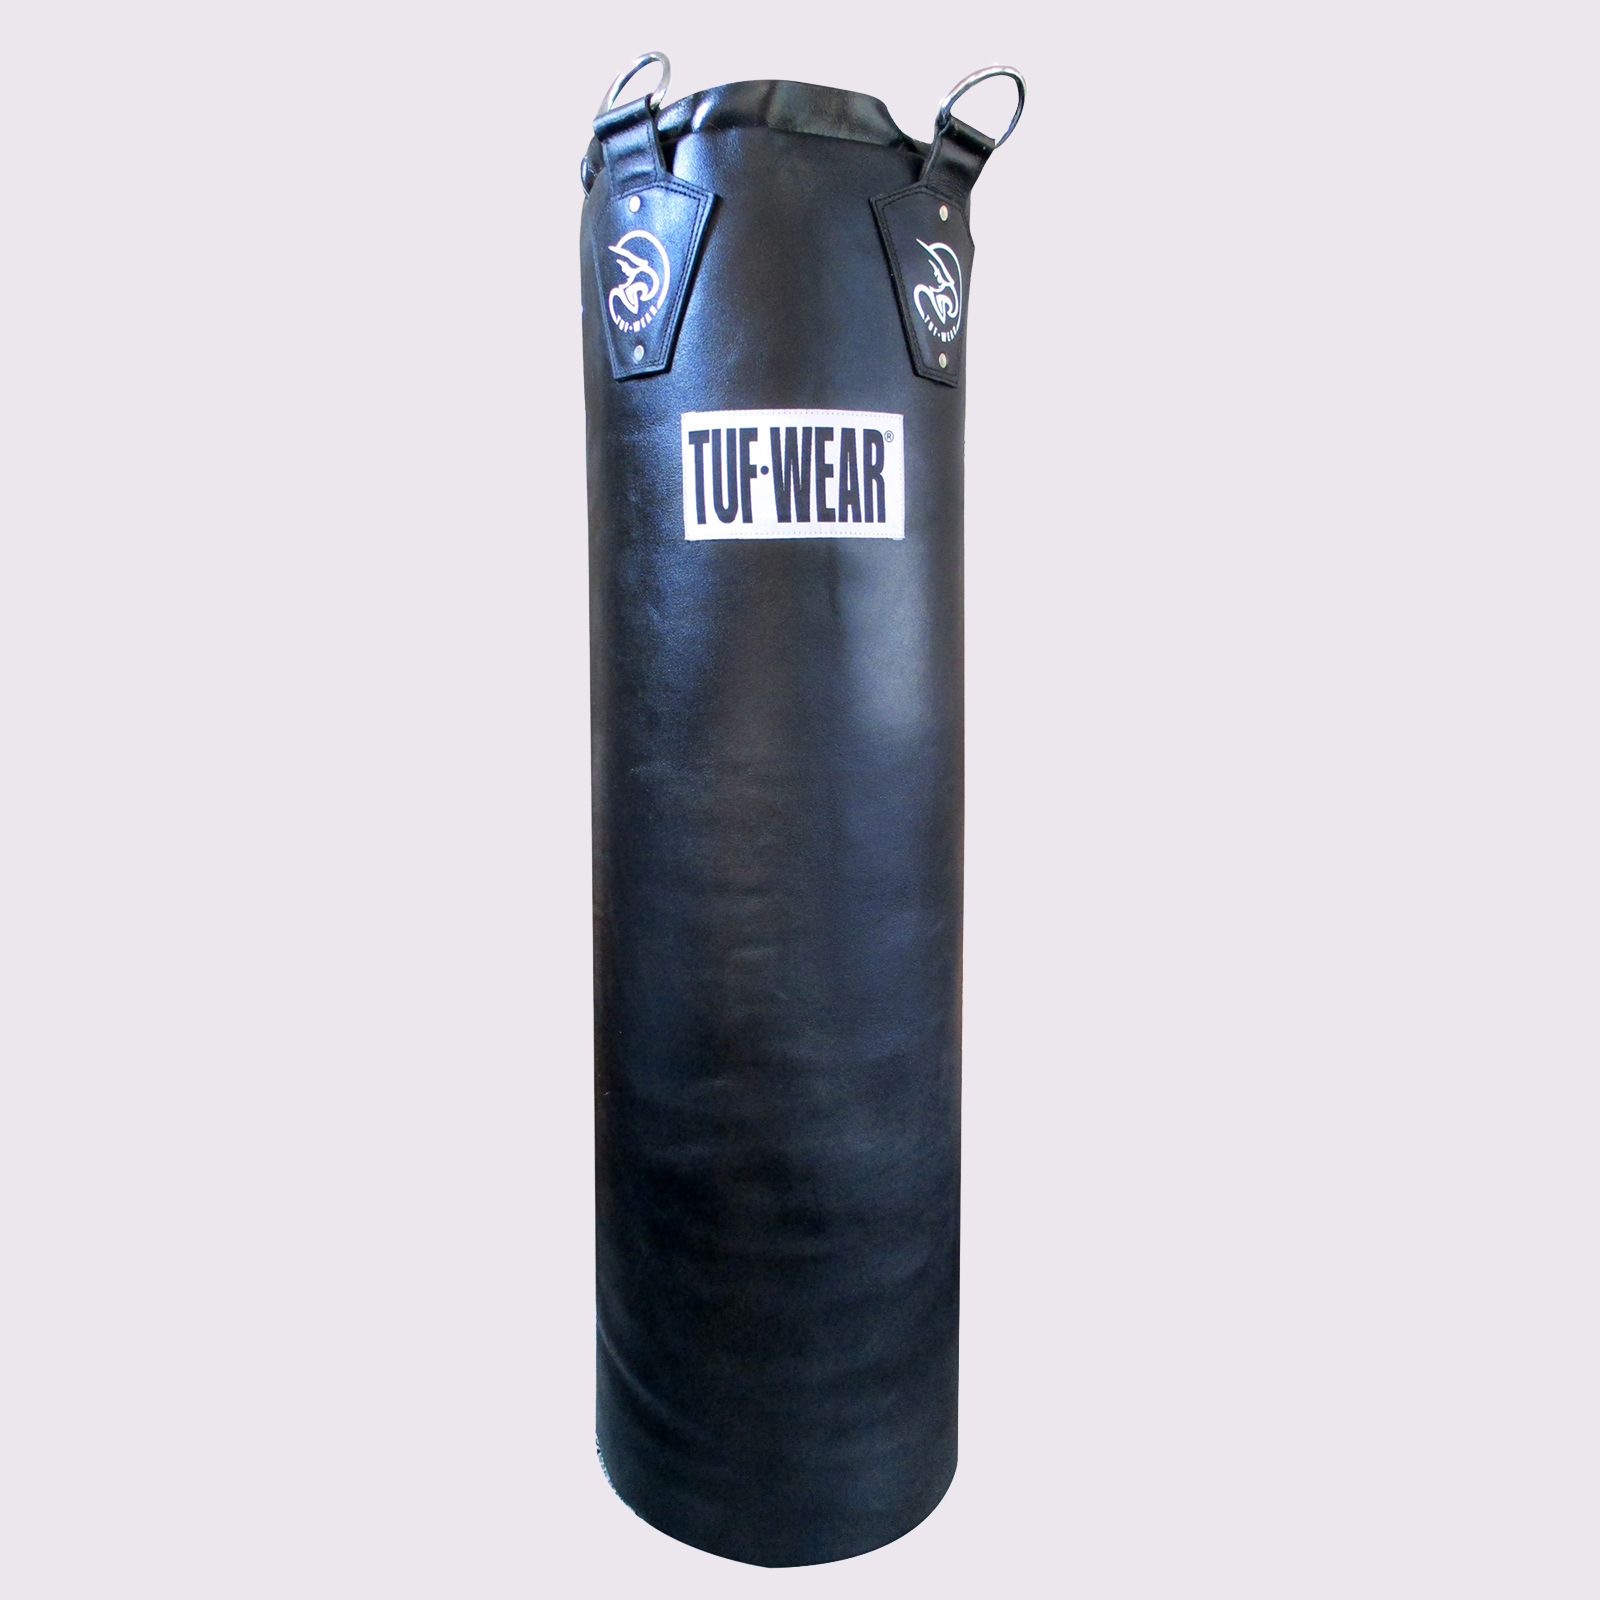 TUF WEAR Punchbag 6ft PU Heavy with Hanging Straps Large Vertical Logo Blue 